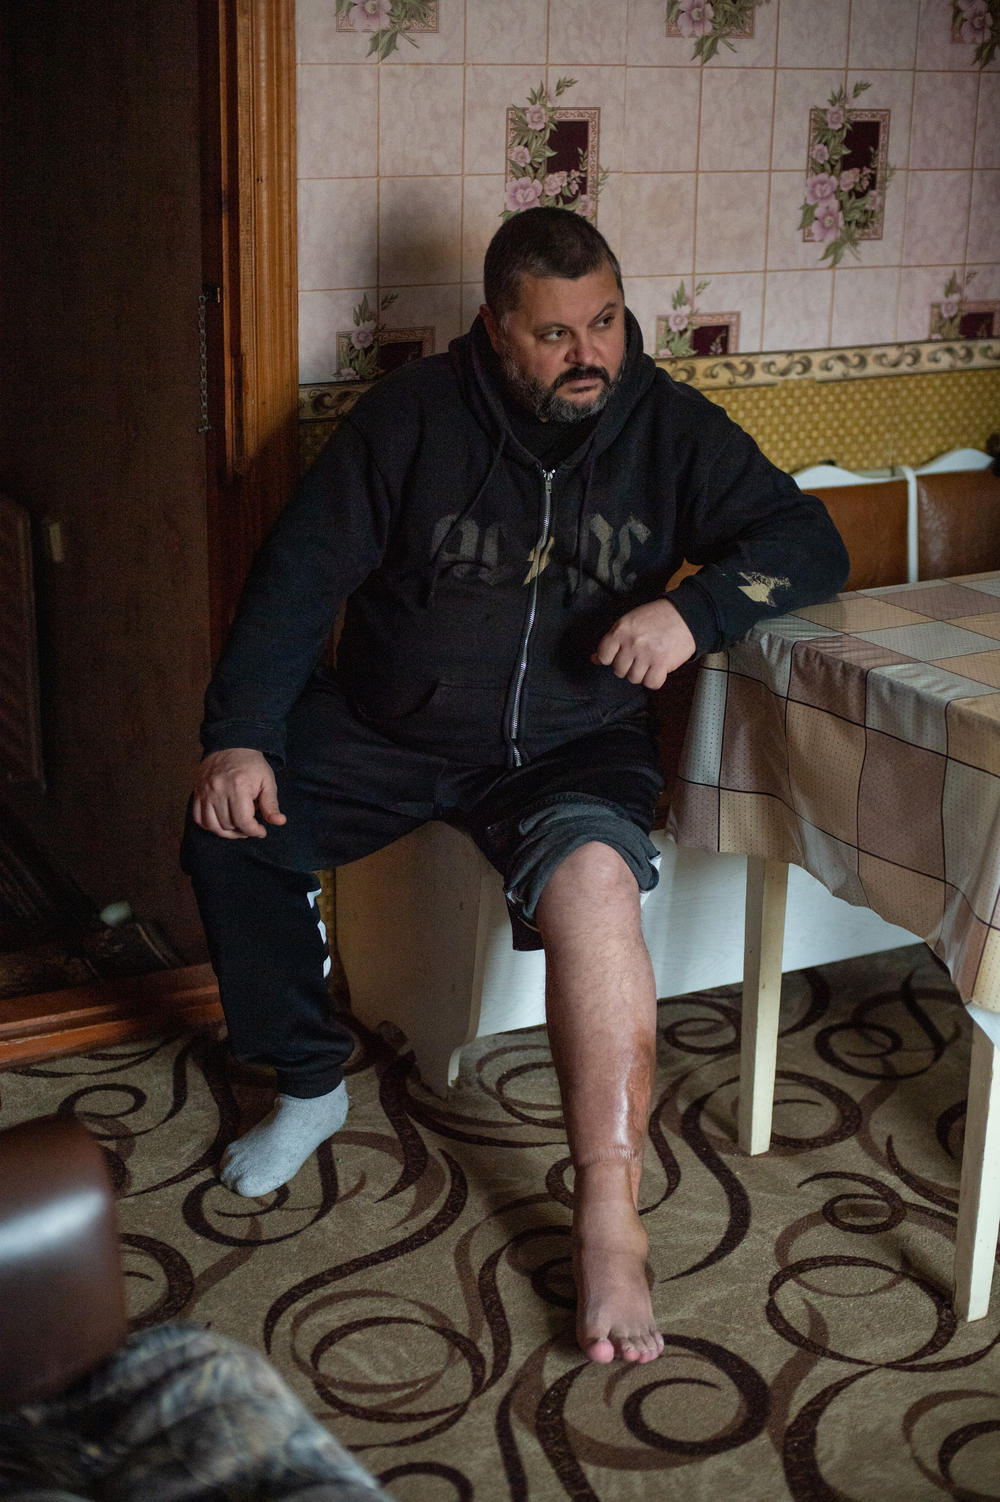 Oleksandr Diakov, a Kherson resident, sits in his home and shows scars on his leg from when he was tortured by Russian soldiers during the occupation of the city.